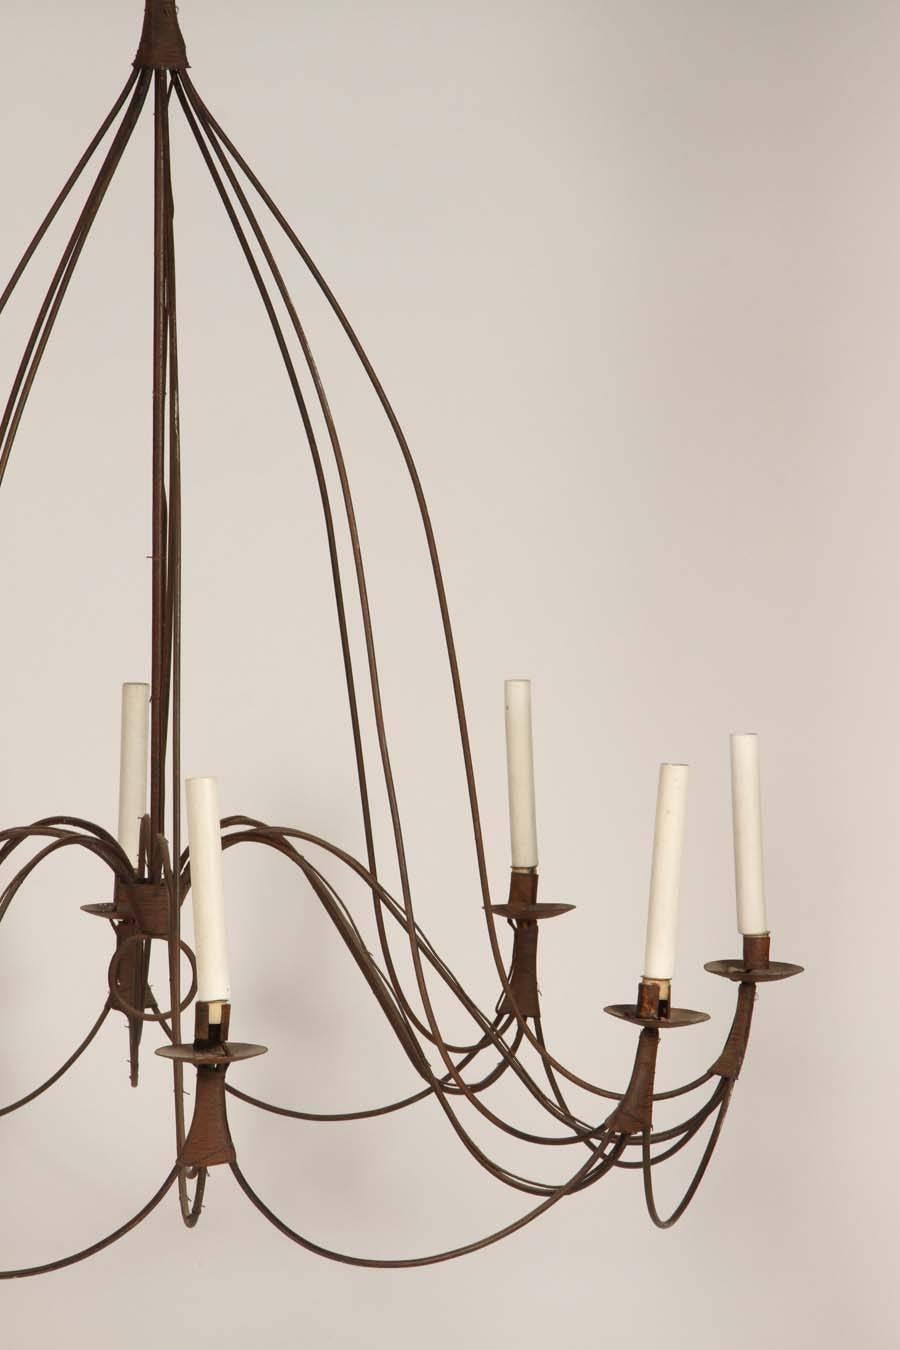 Large French Provincial chandelier with eight-lights. It's delicately simple lines contrast wonderfully with it's rustic material and construction. Perfect in an entryway or on a covered veranda.